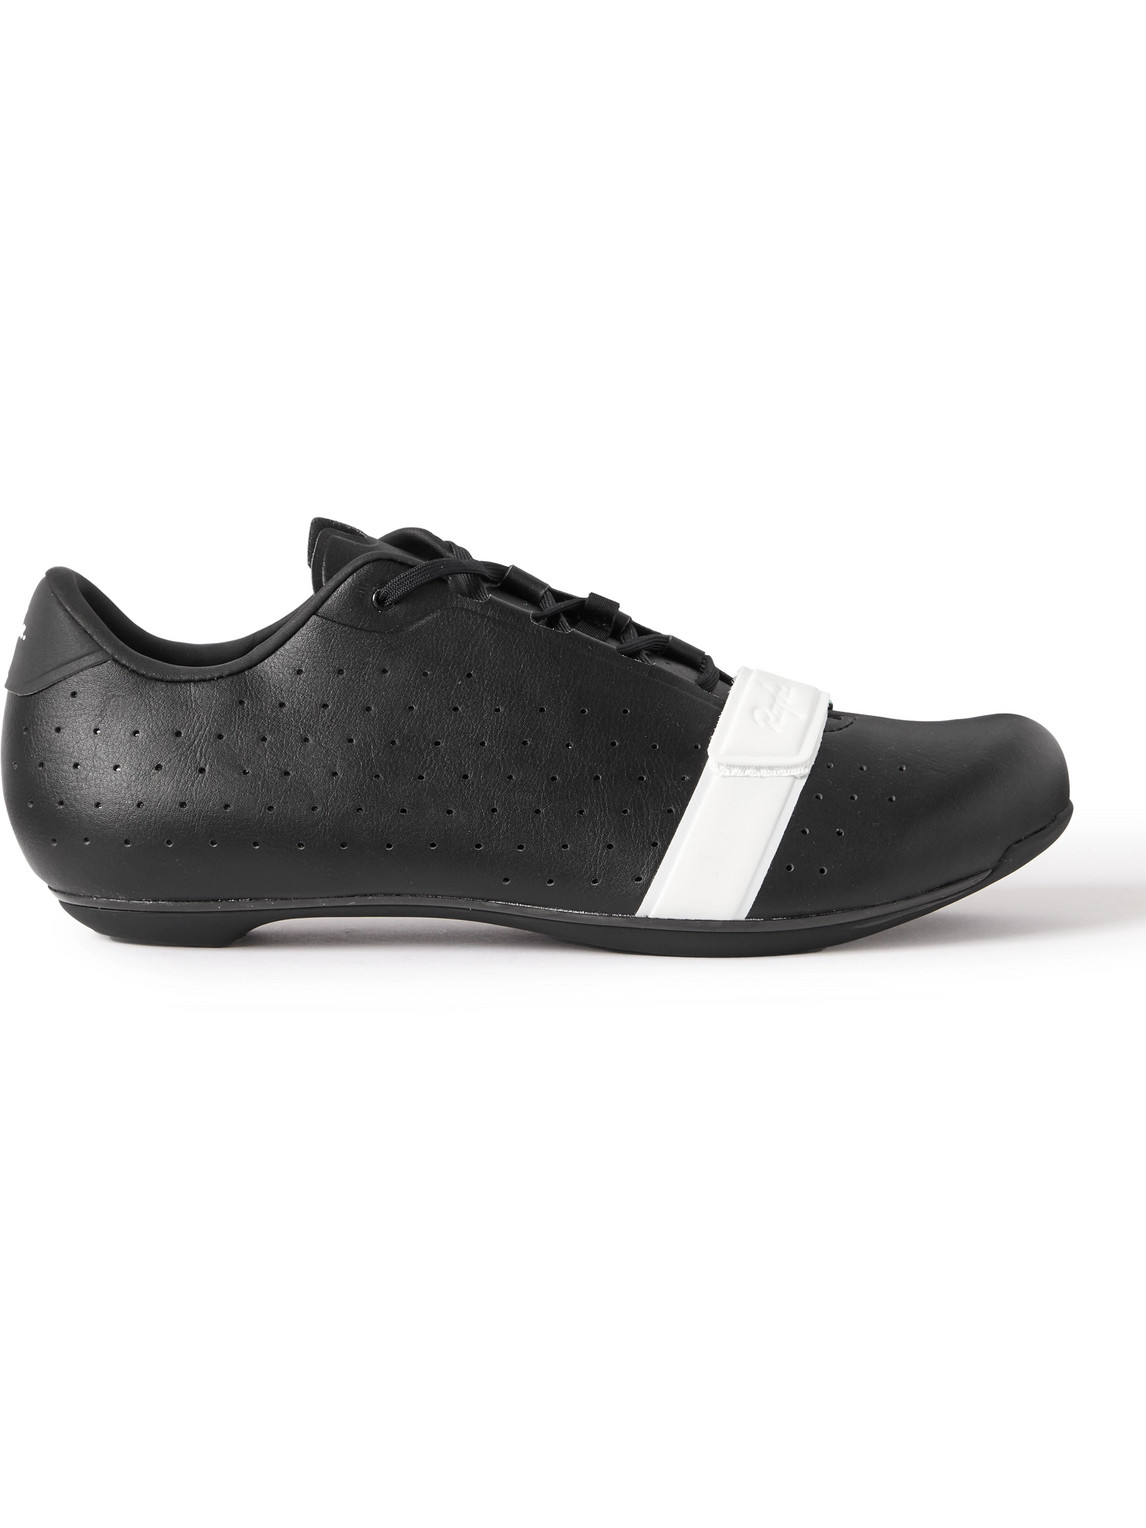 Rapha Classic Cycling Shoes In Black